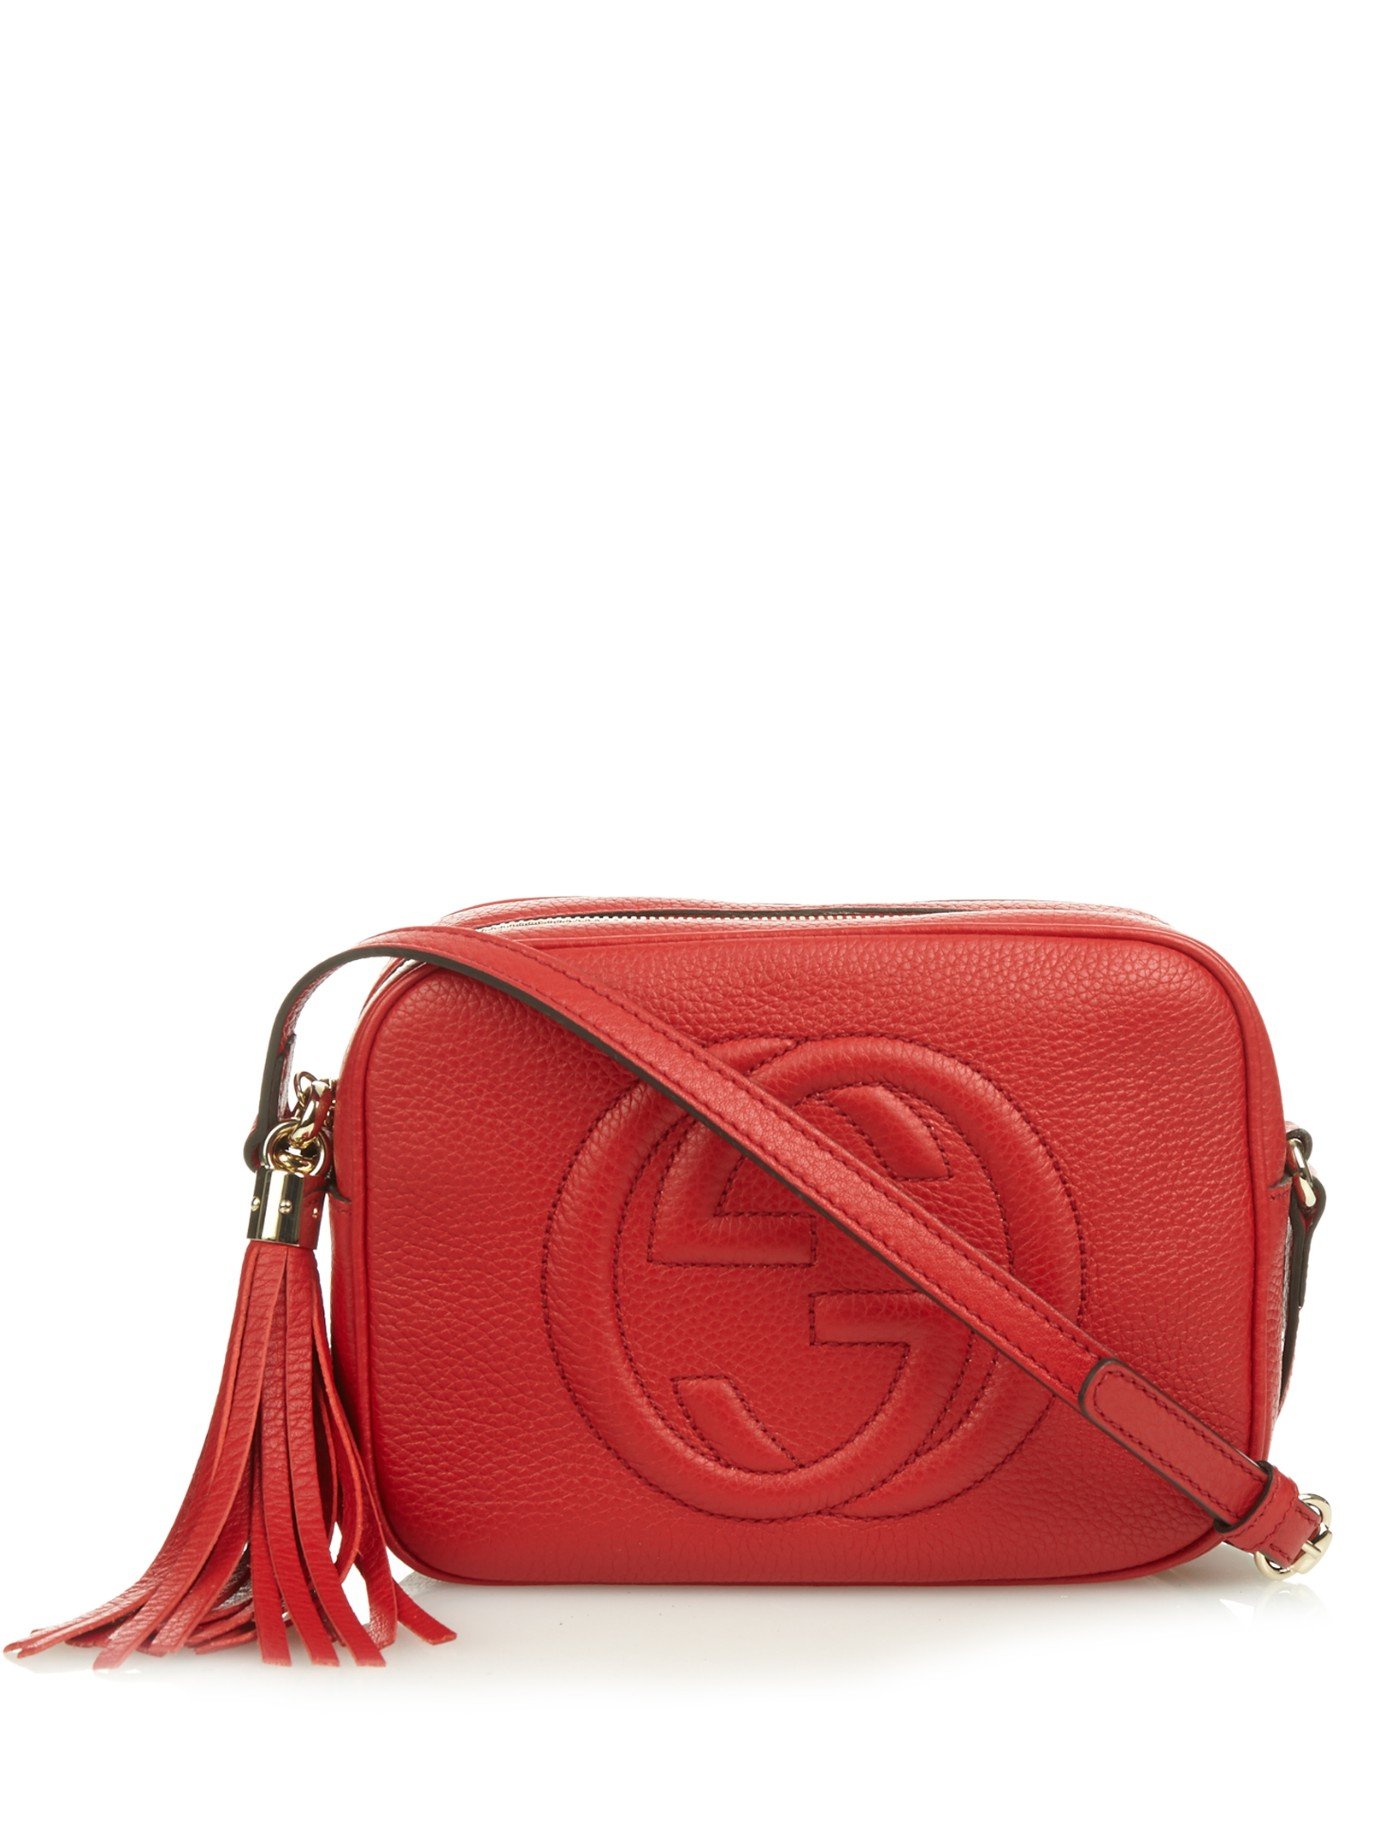 Lyst - Gucci Soho Grained-Leather Cross-Body Bag in Red